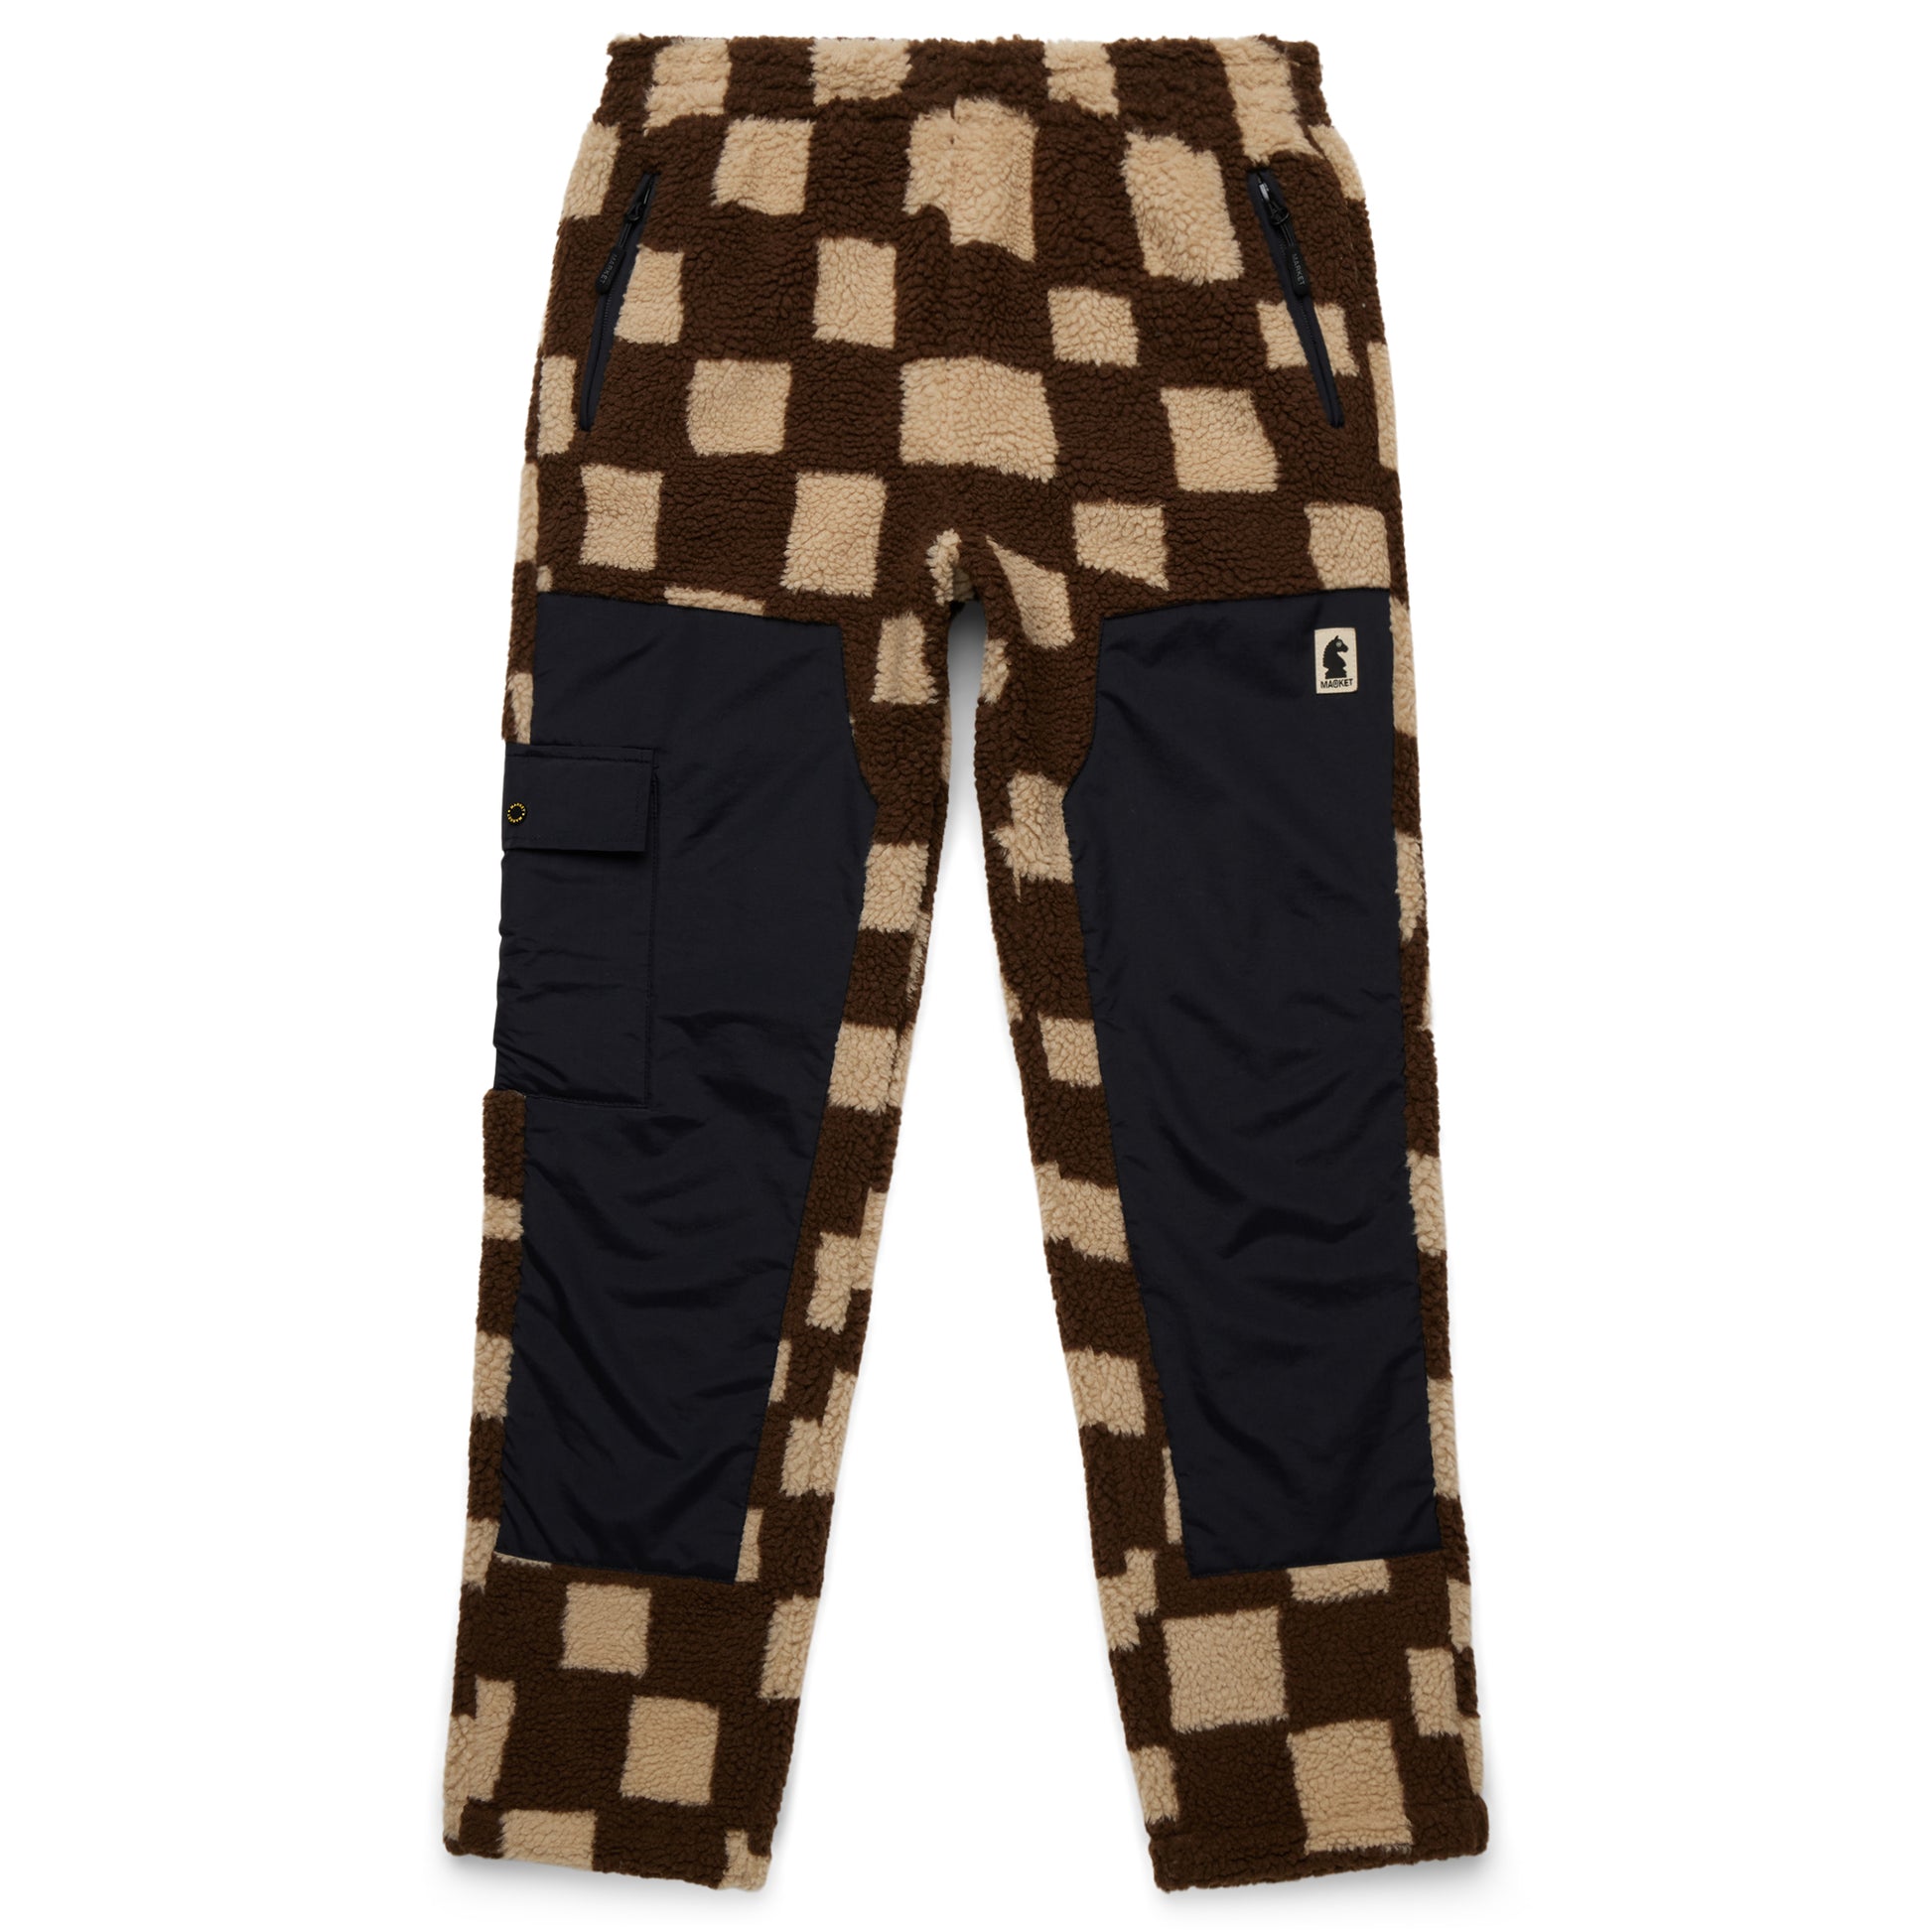 MARKET clothing brand CHESS CLUB JACQUARD SHERPA PANTS. Find more graphic tees, sweatpants, shorts and more bottoms at MarketStudios.com. Formally Chinatown Market. 